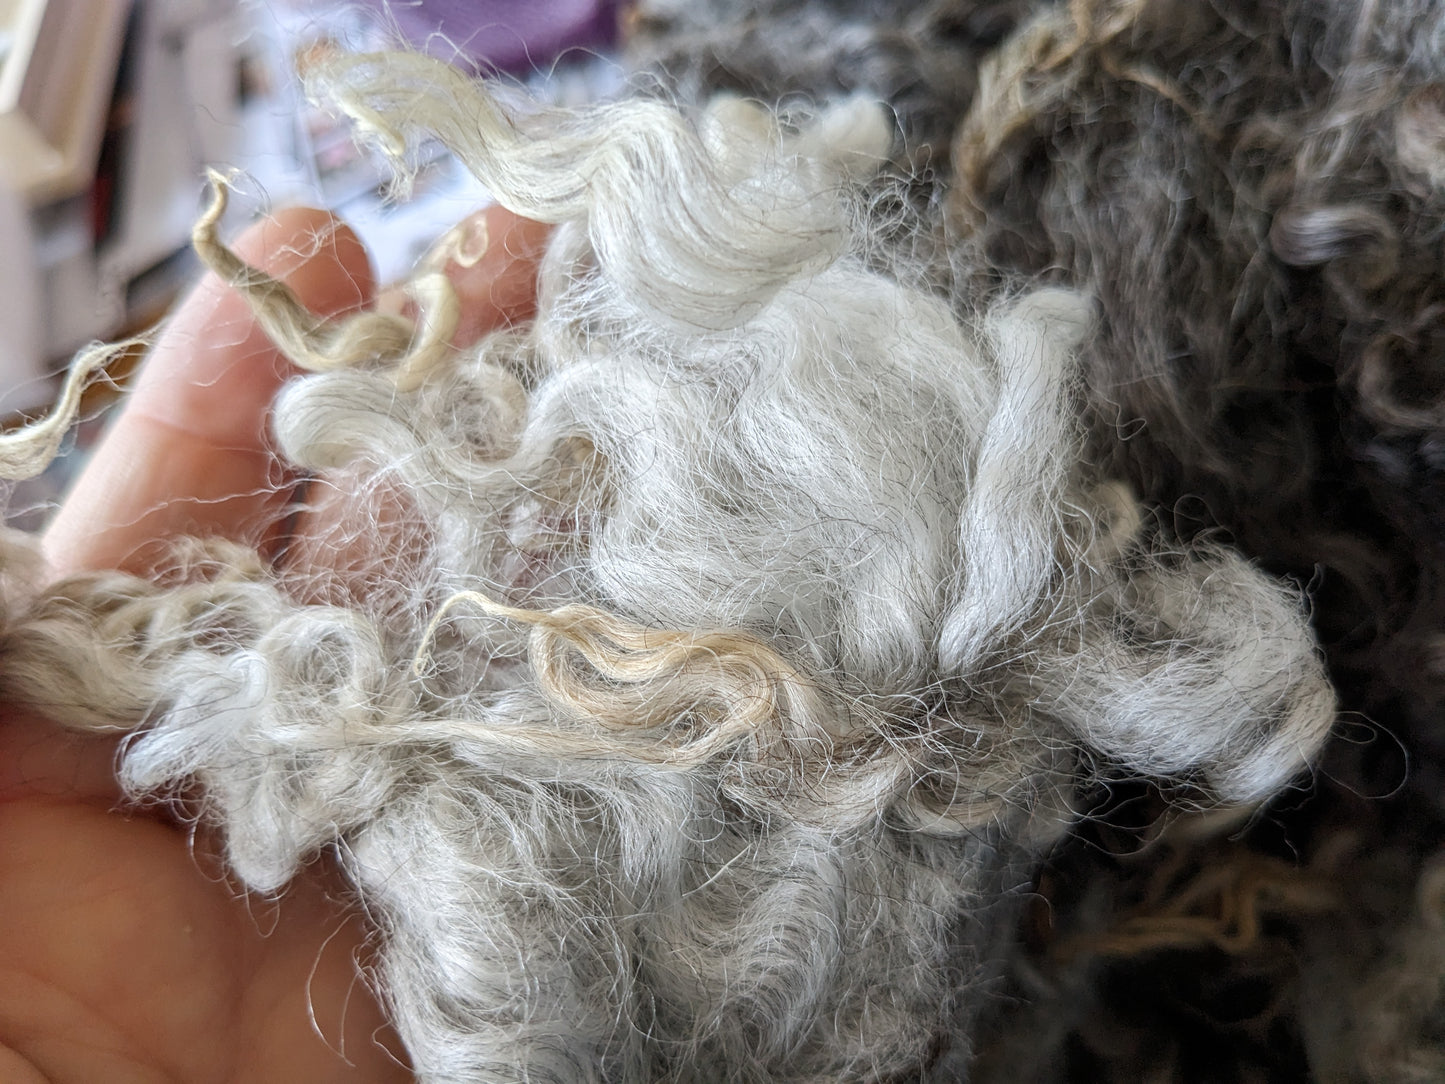 200g hand washed natural fleece, mix of textures and shades of a beautiful Gotland X fleece